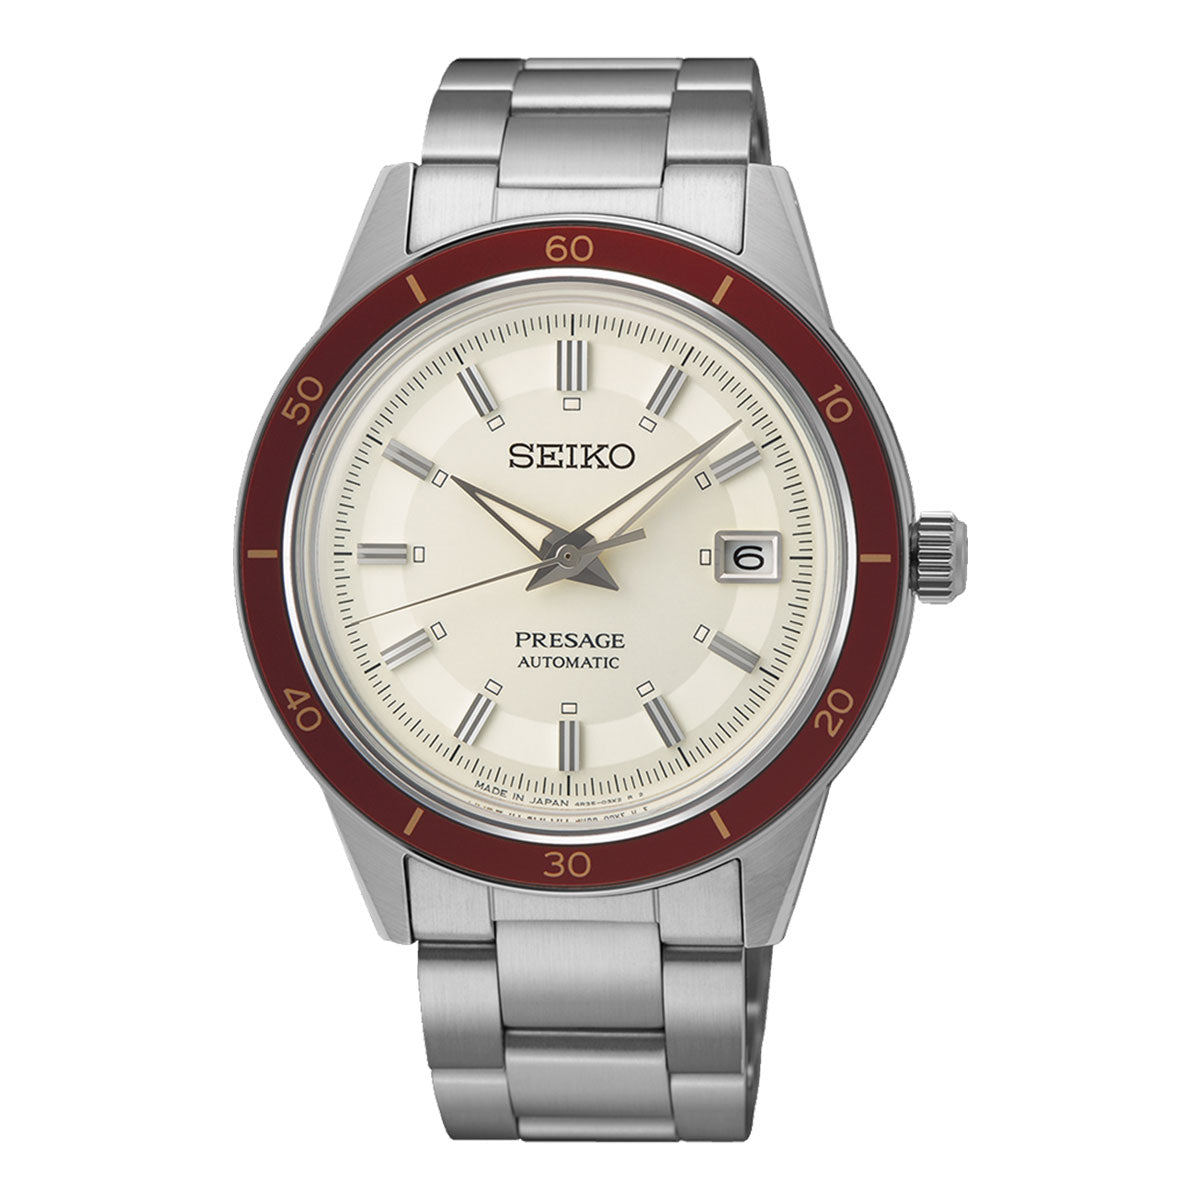 Seiko Presage Automatic With Manual Winding 40.8mm Watch